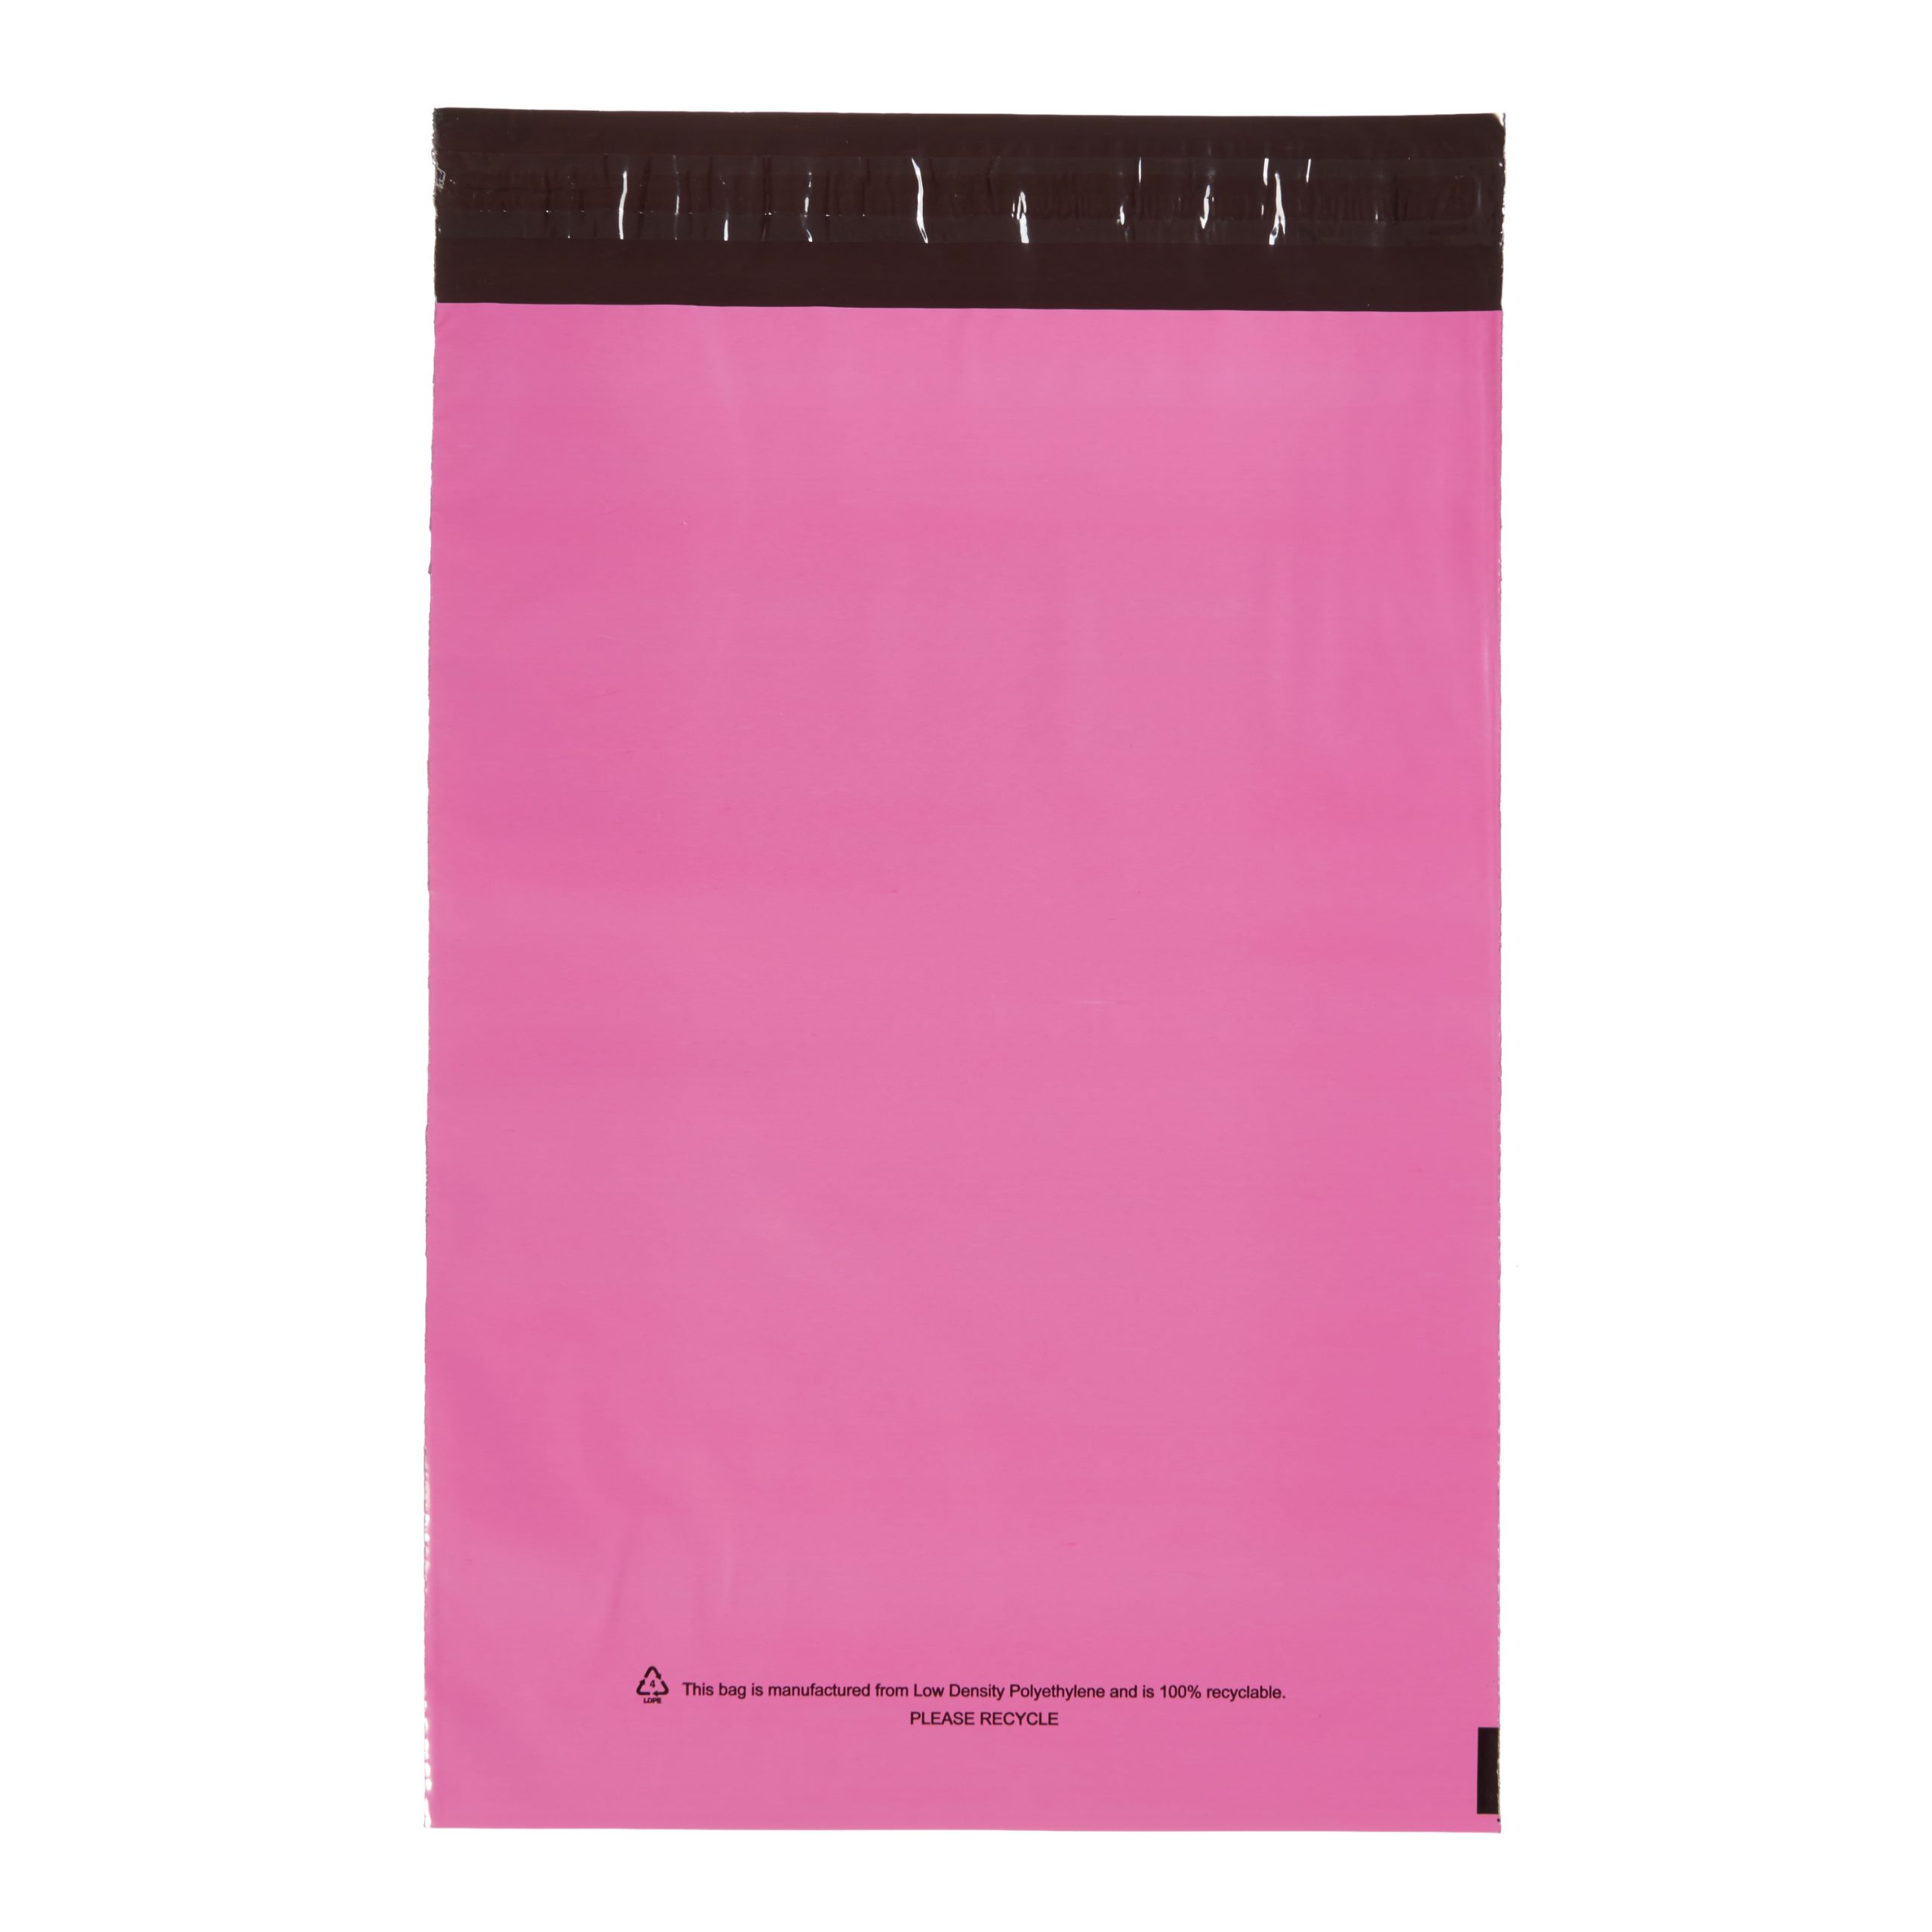 50 Large Pink Colour Plastic Polythene Peel Seal Mailing Postal Bags XL Size 17 x 22 430 x 560mm Self Seal Packing Packaging Postage Mail Sacks Envelopes Mailers 